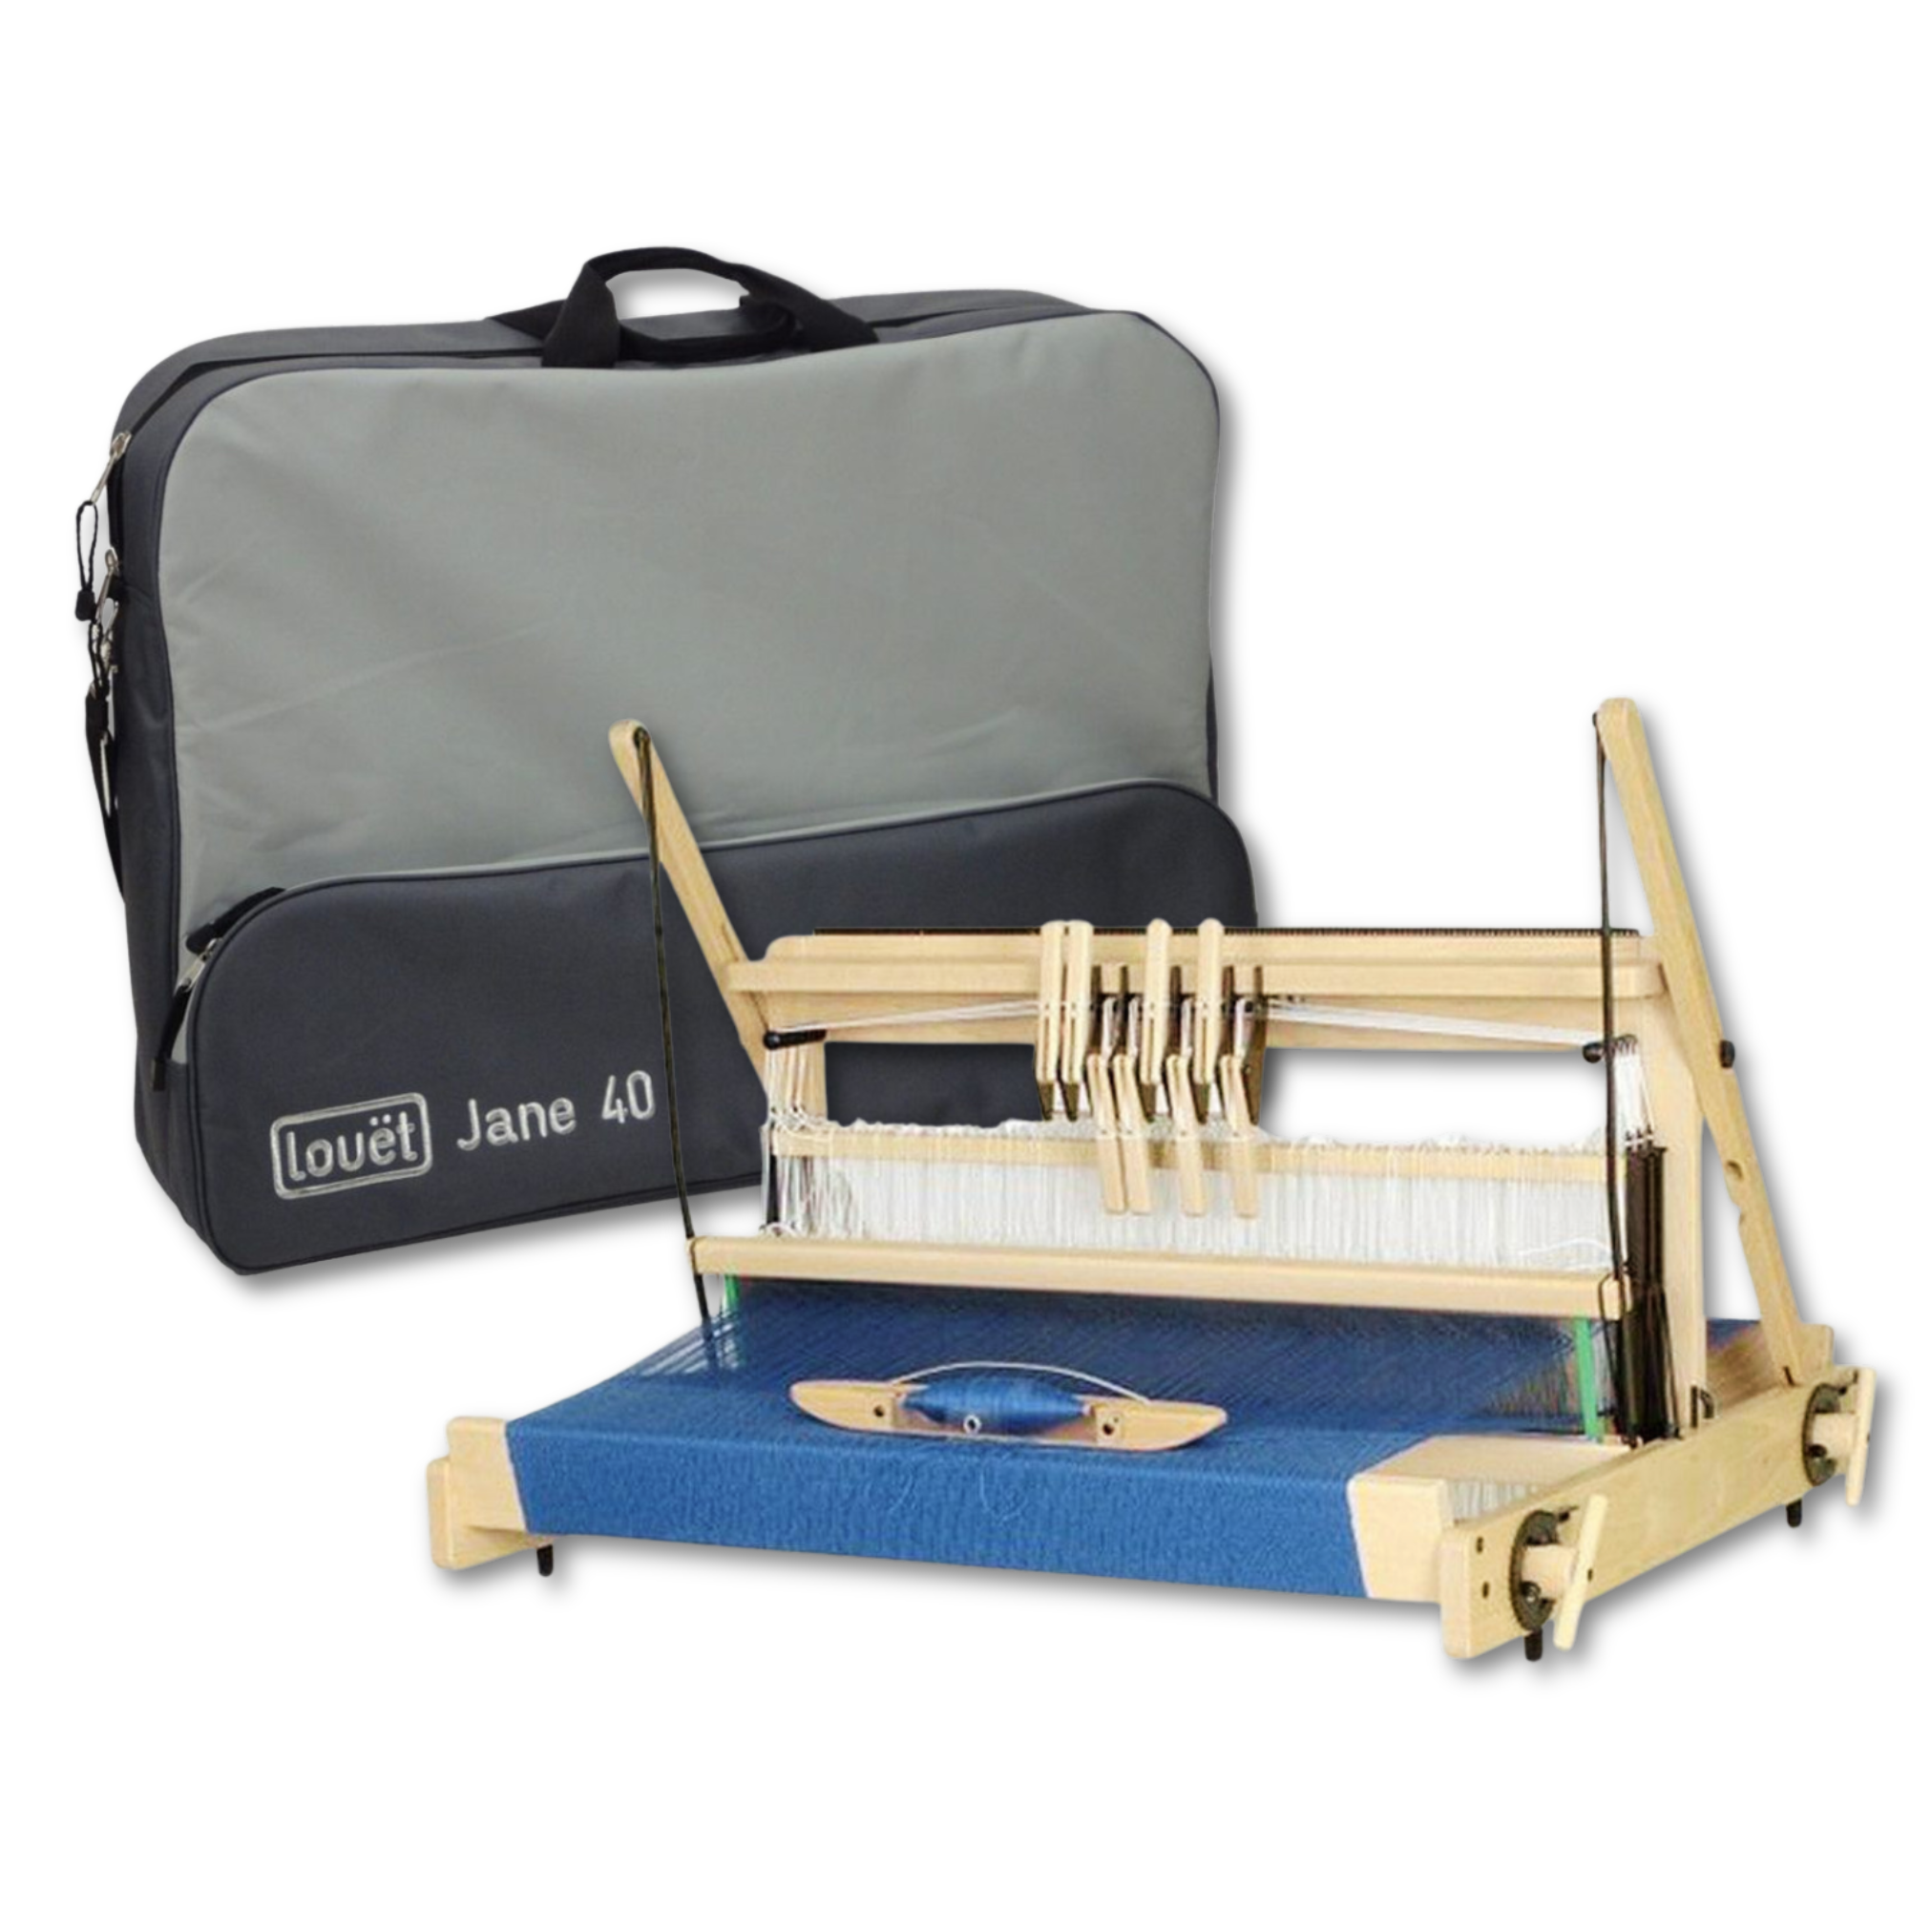 Louet Jane 40 Loom and Travel Case Package